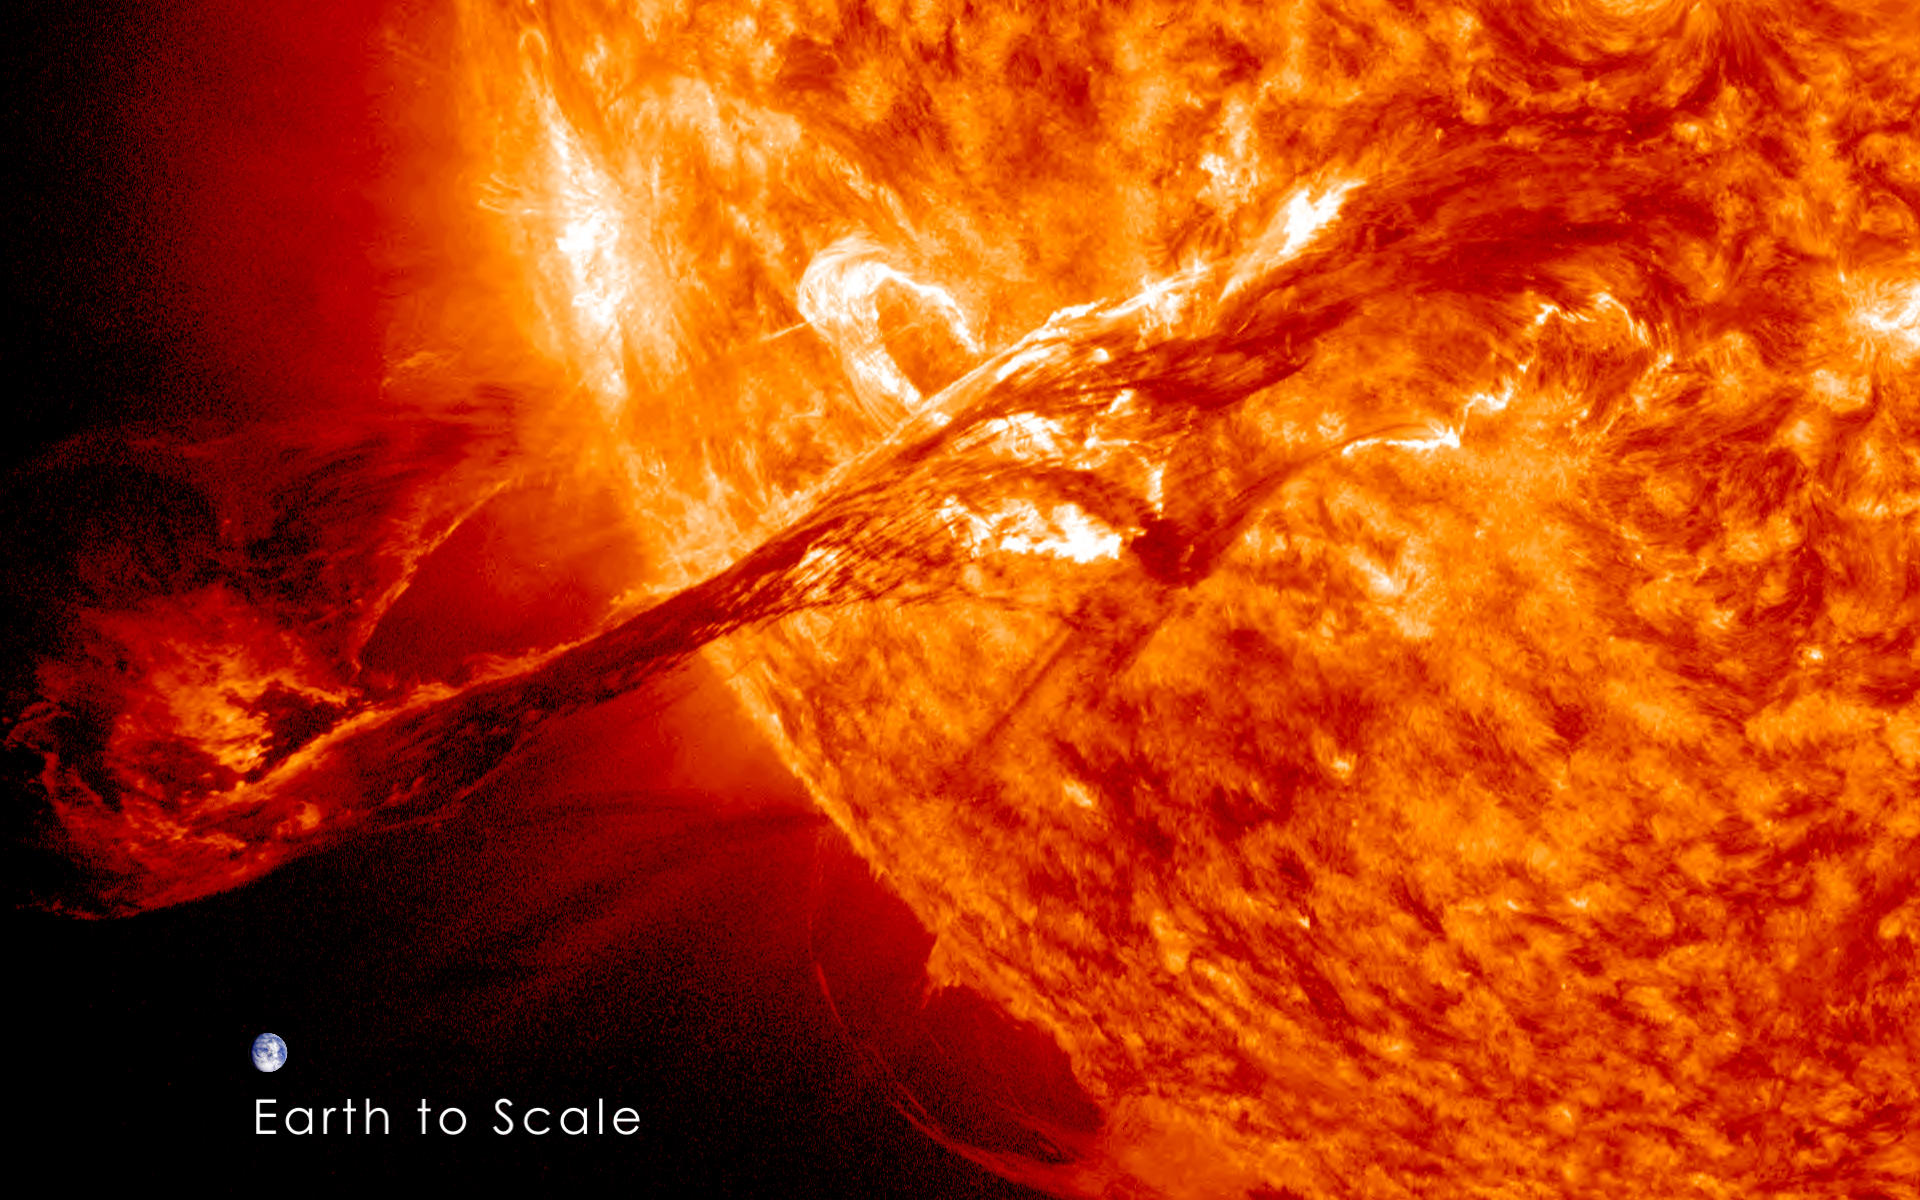 Preview Image for August 31, 2012 Magnificent CME